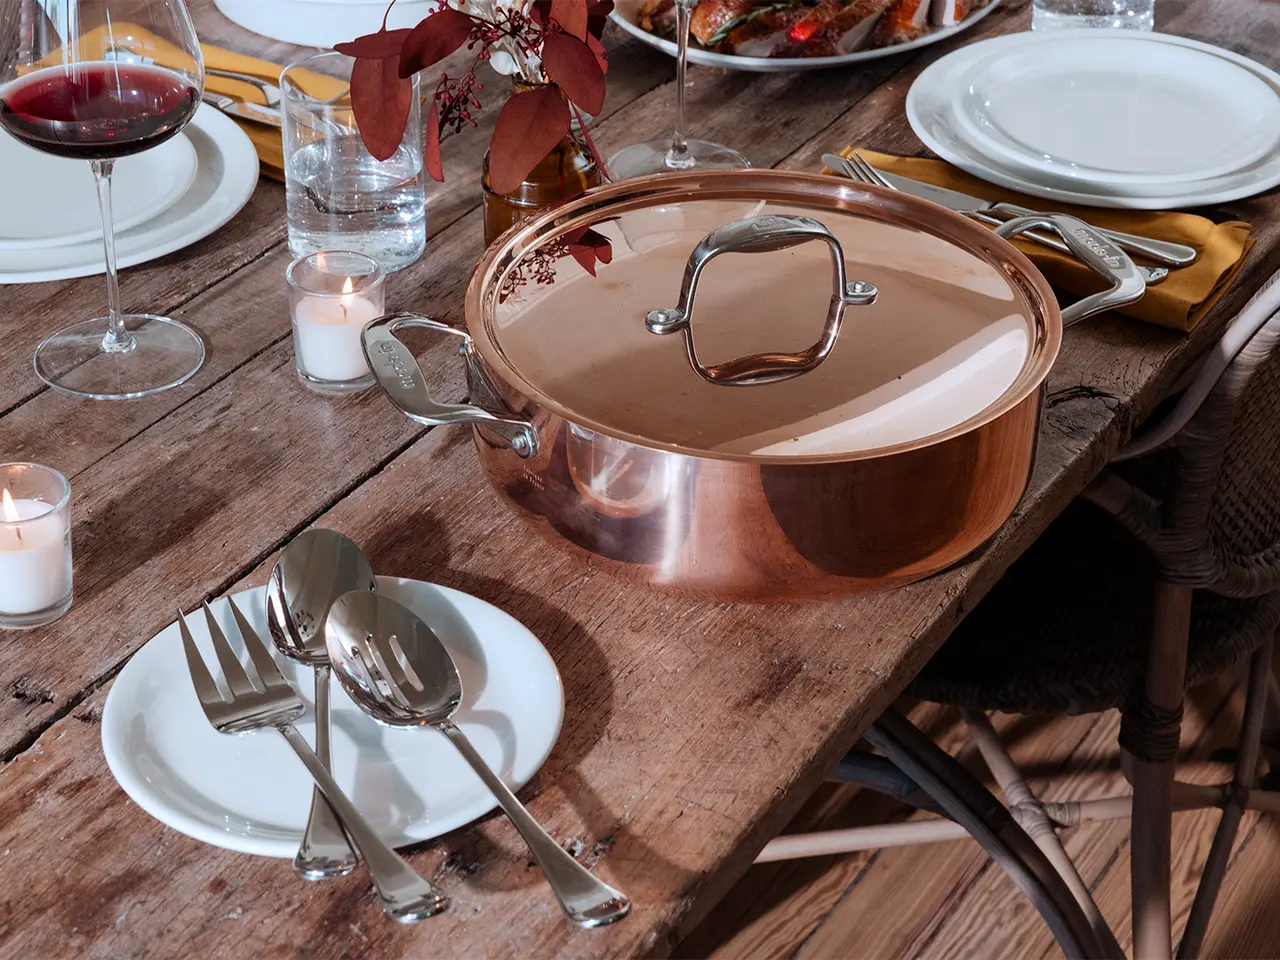 A copper pot sits on a dining table set with plates, cutlery, and glasses of wine, ready for a meal.